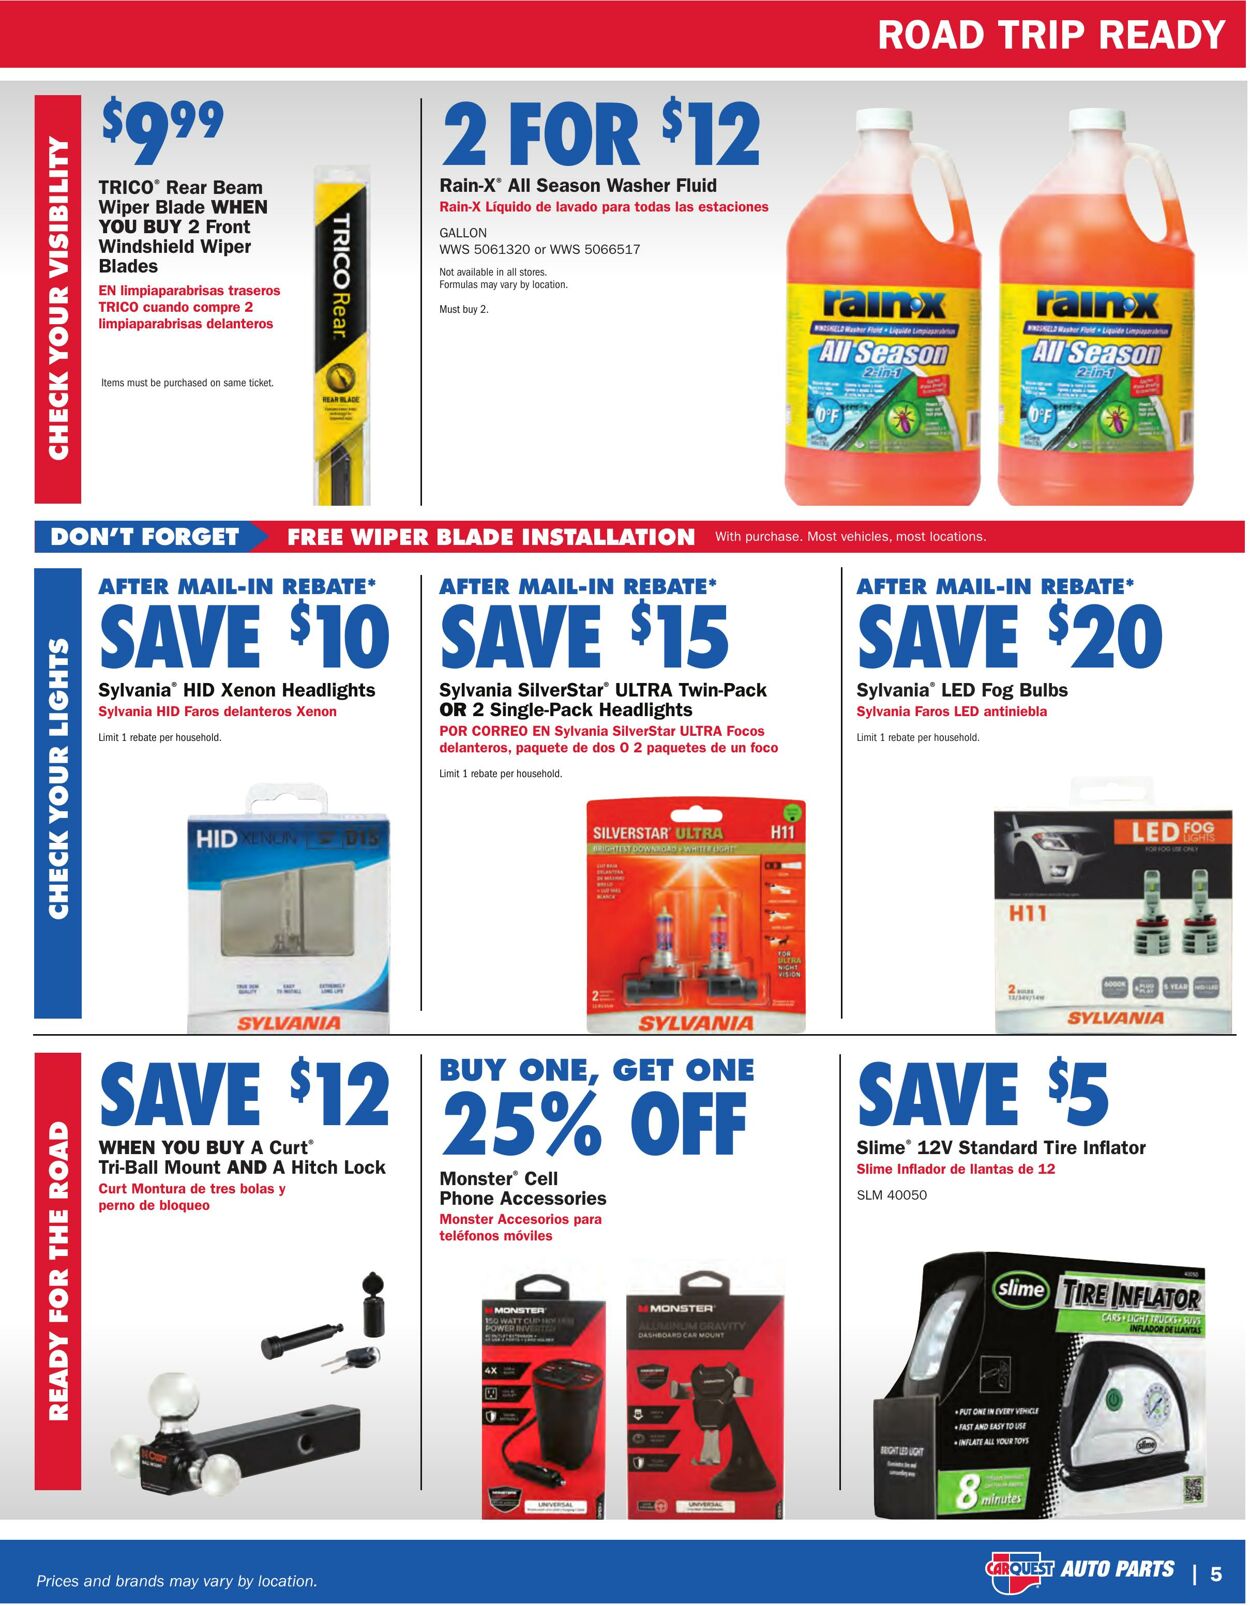 Weekly ad CarQuest 06/23/2022 - 08/24/2022